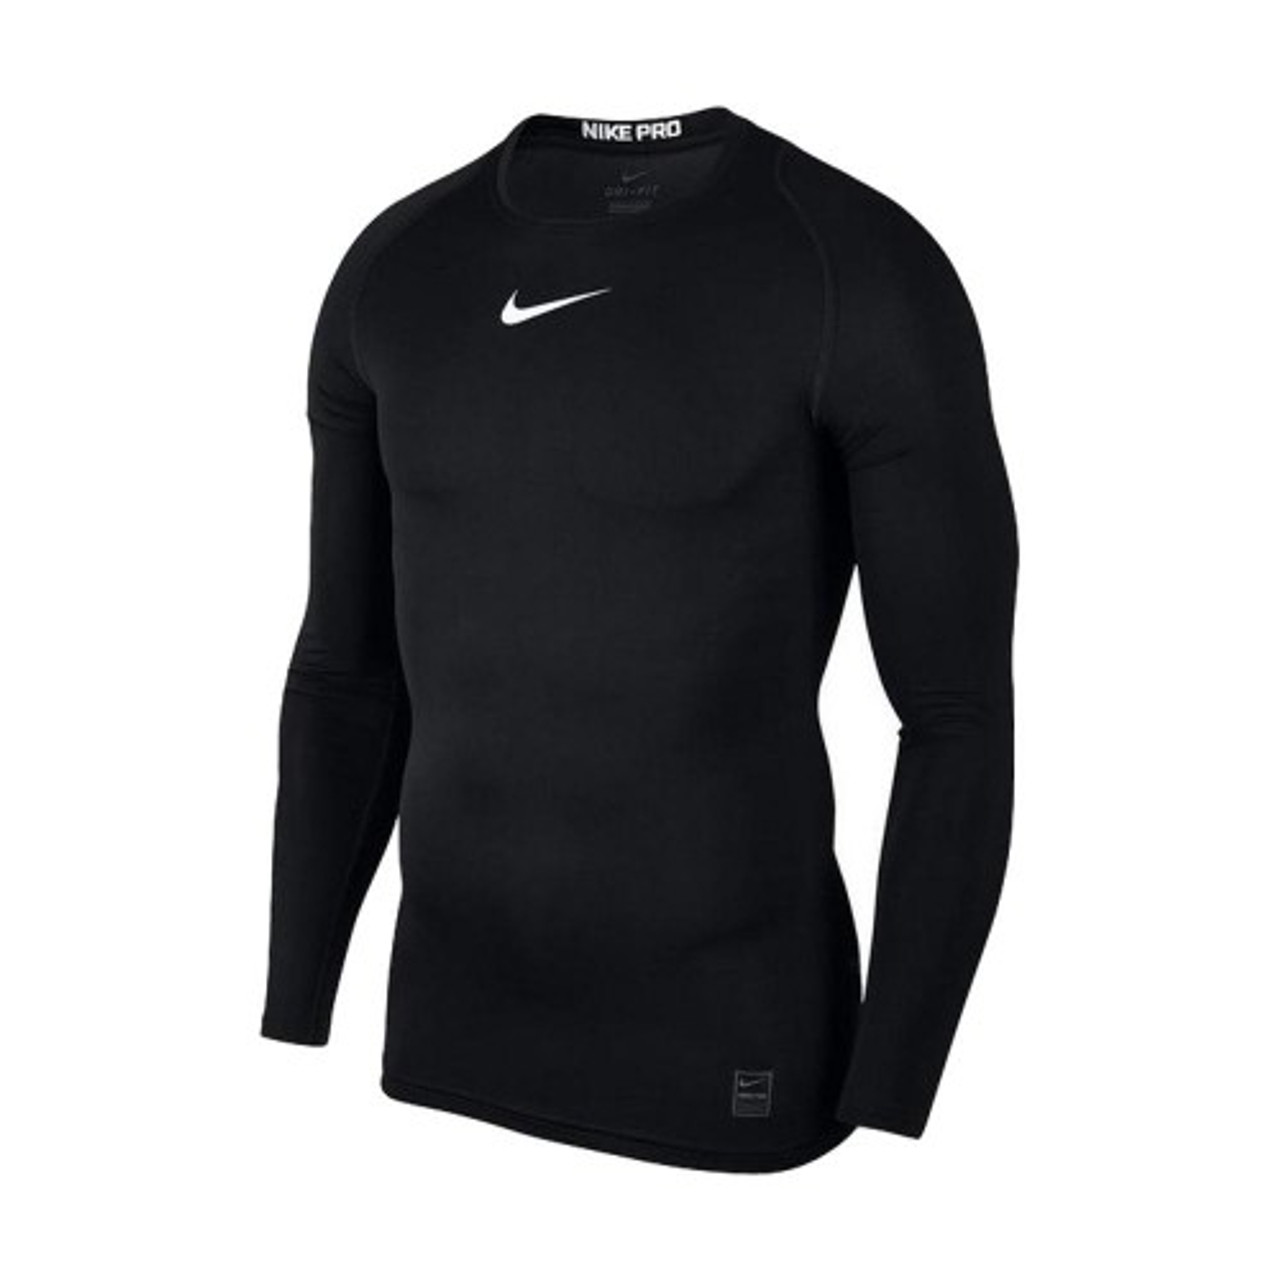 NIKE PRO LONG SLEEVE COMPRESSION TOP 